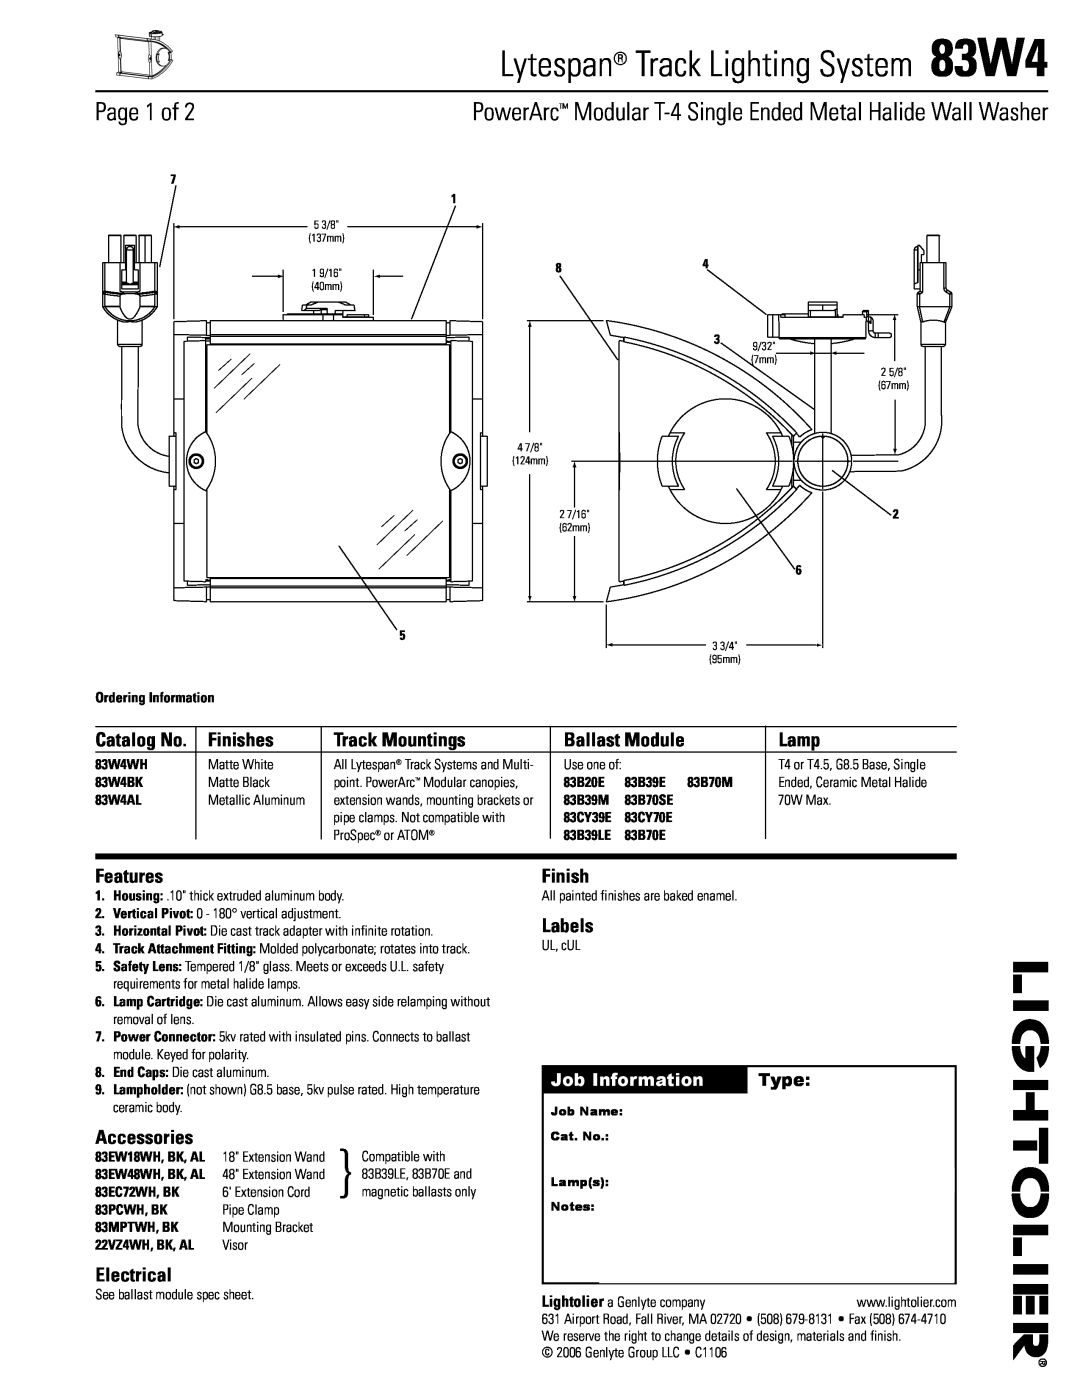 Lightolier manual Lytespan Track Lighting System 83W4, Page of, Finishes, Track Mountings, Ballast Module, Lamp, Labels 